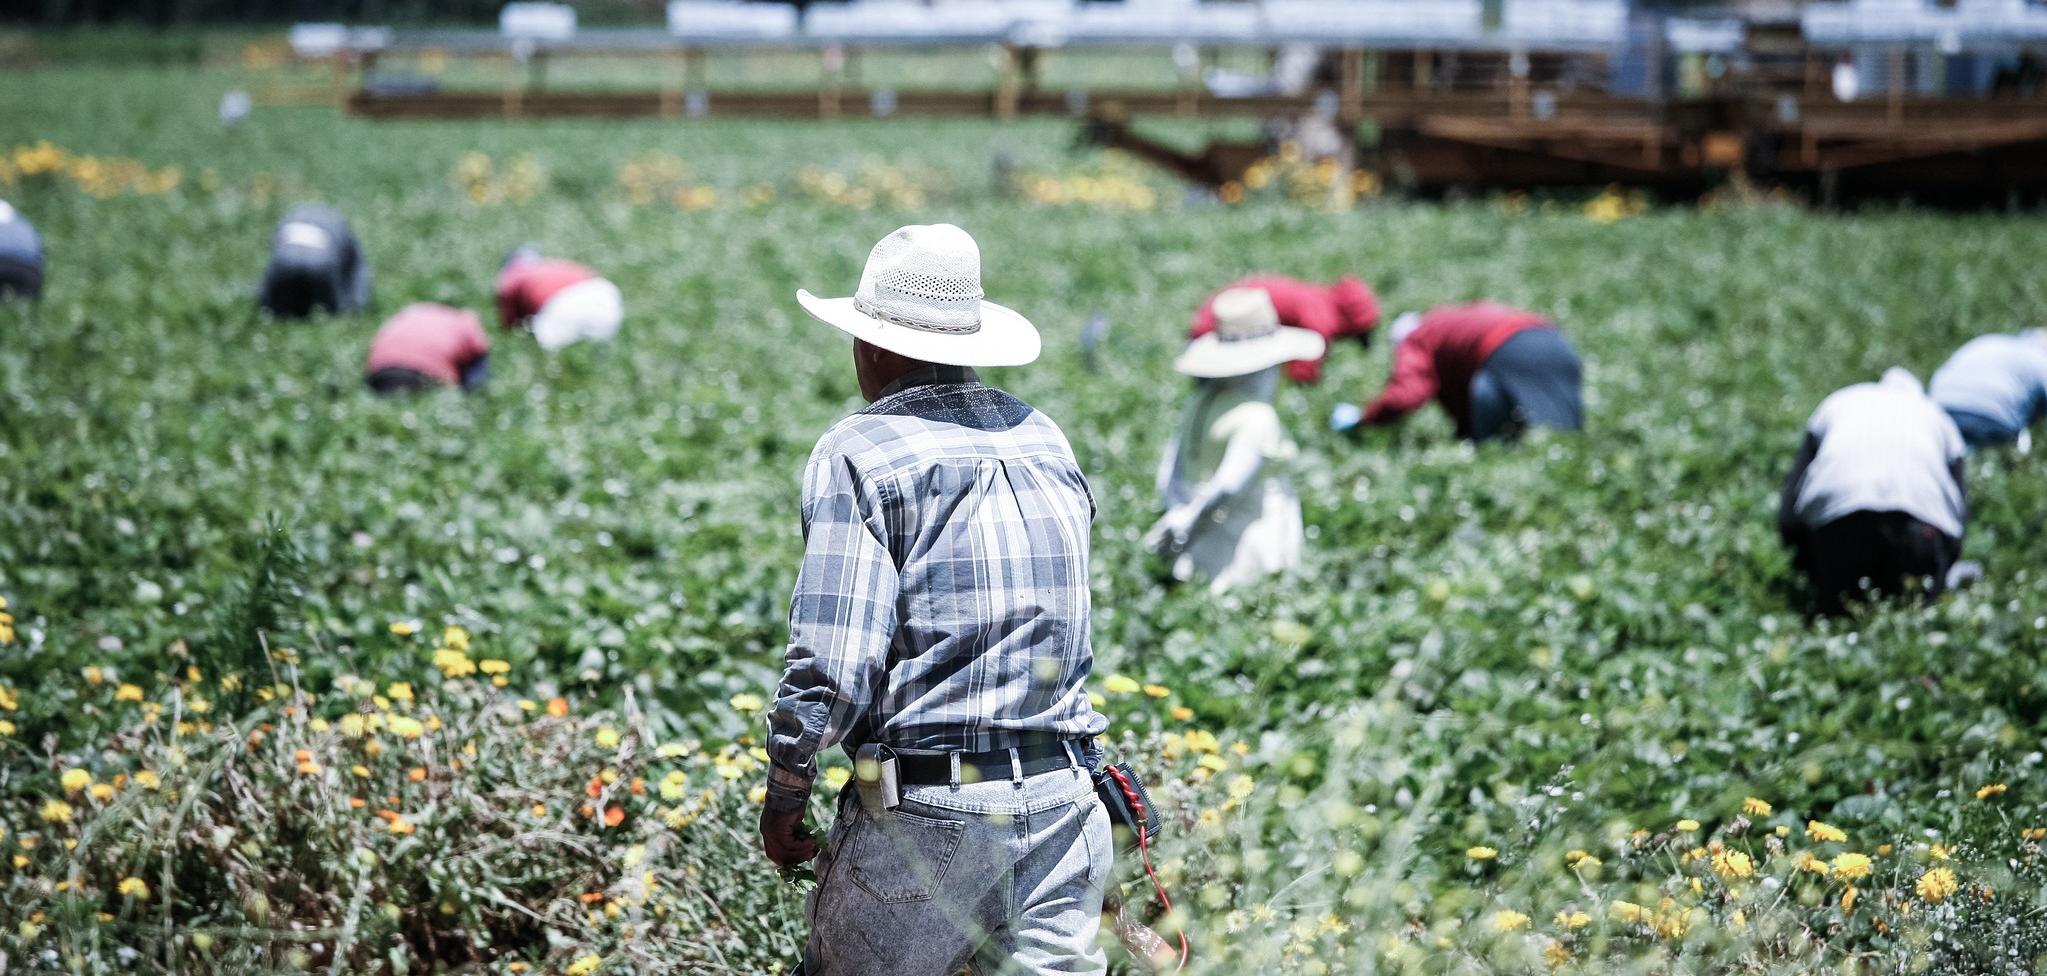 Workers in hats bent over in a field